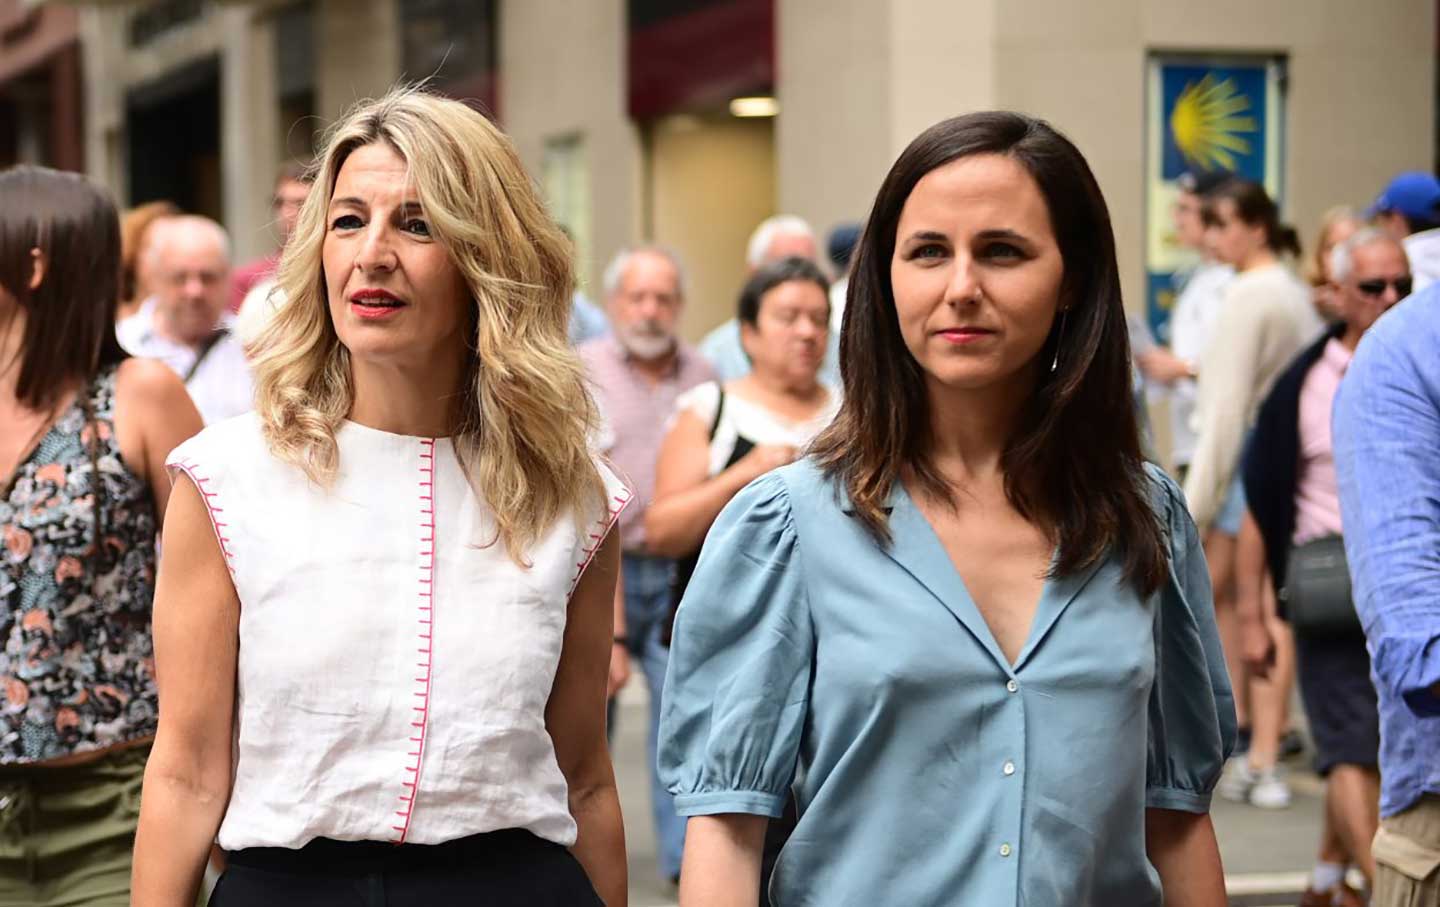 The leader of Sumar, Yolanda Diaz, and the general secretary of Podemos, Ione Belarra, during a walk with the candidates for Congress and Senate, before a public act of Sumar, on 17 July, 2023 in Pamplona, Navarra, Spain.